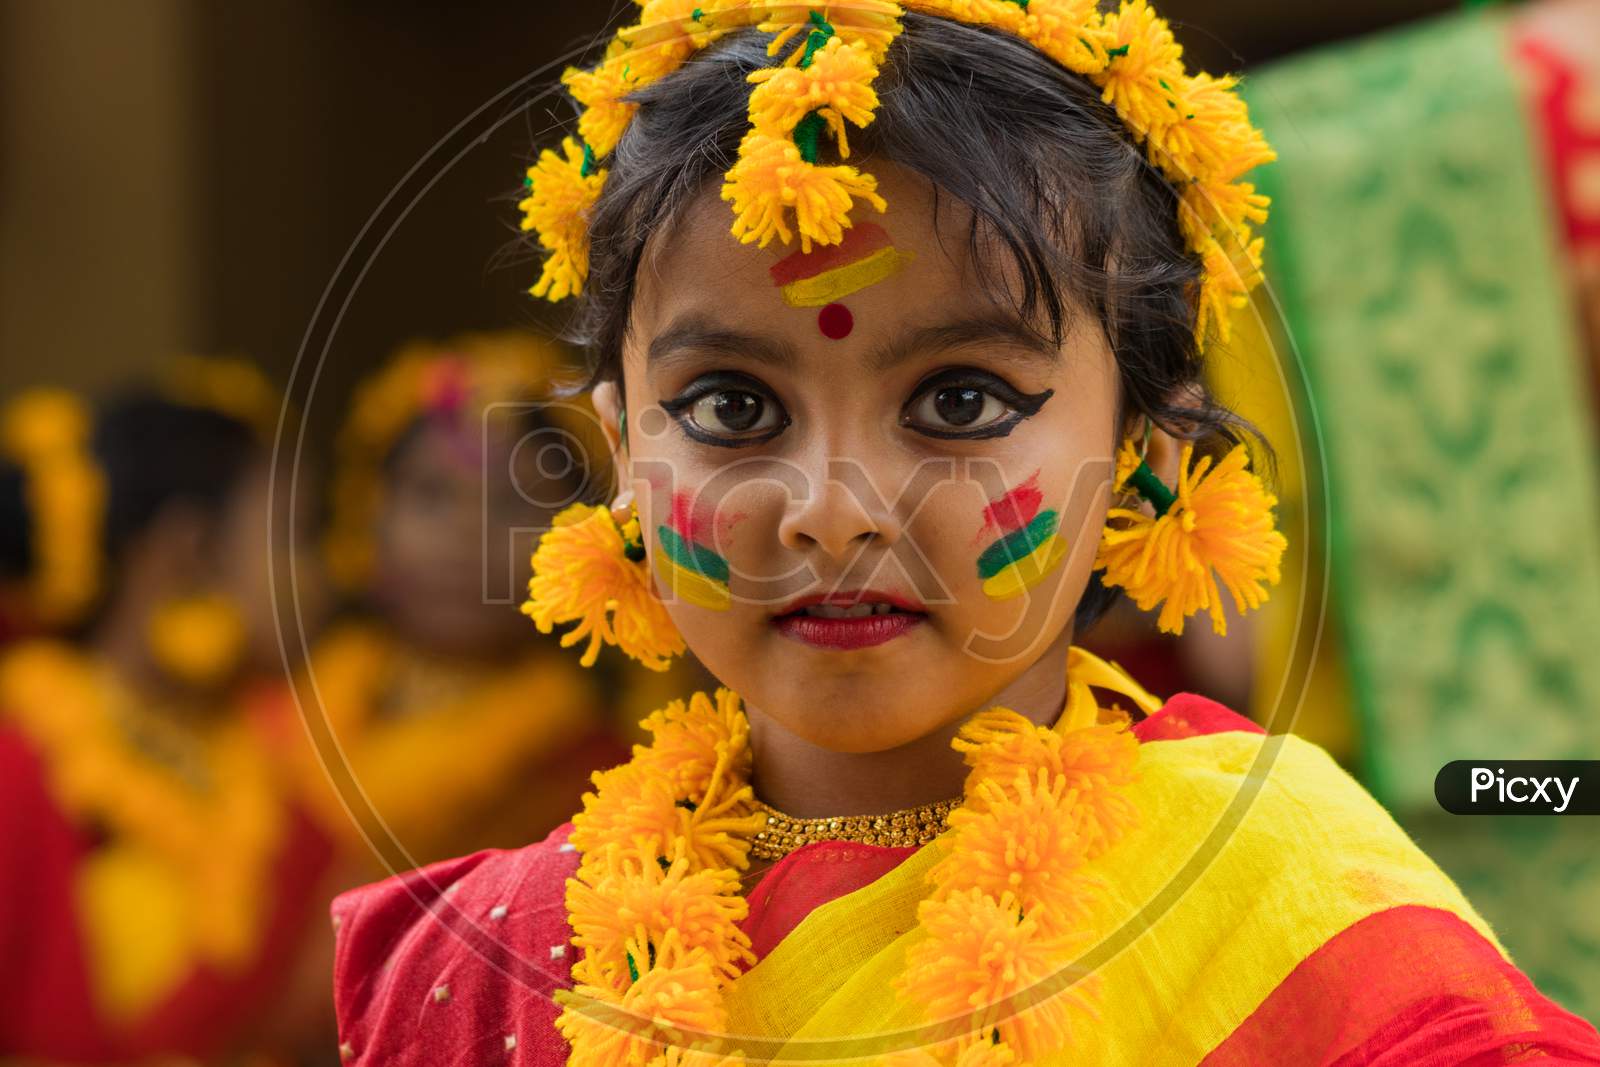 A cute little girl in a colorful dress to celebrate Holi, the festival of colors.